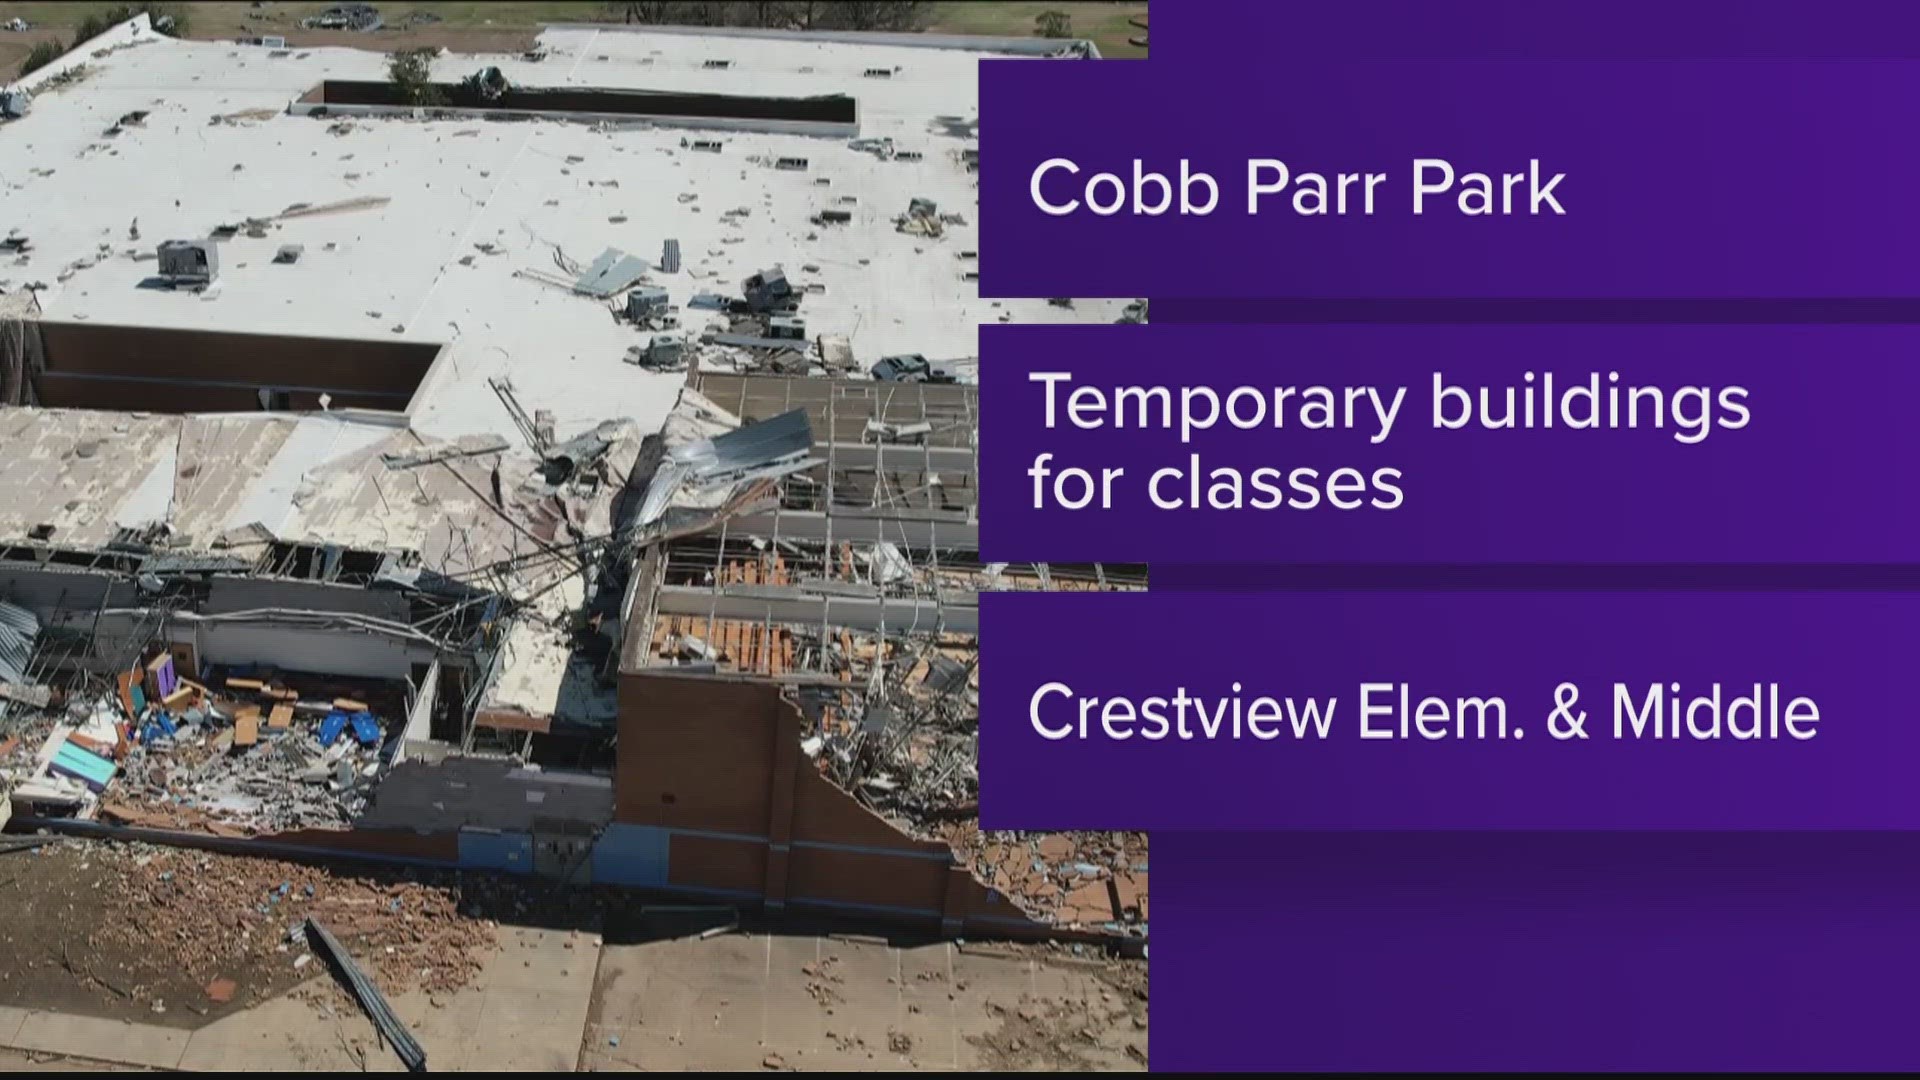 Crestview Elementary and Middle schools were destroyed when an EF3 tornado tore through the town.